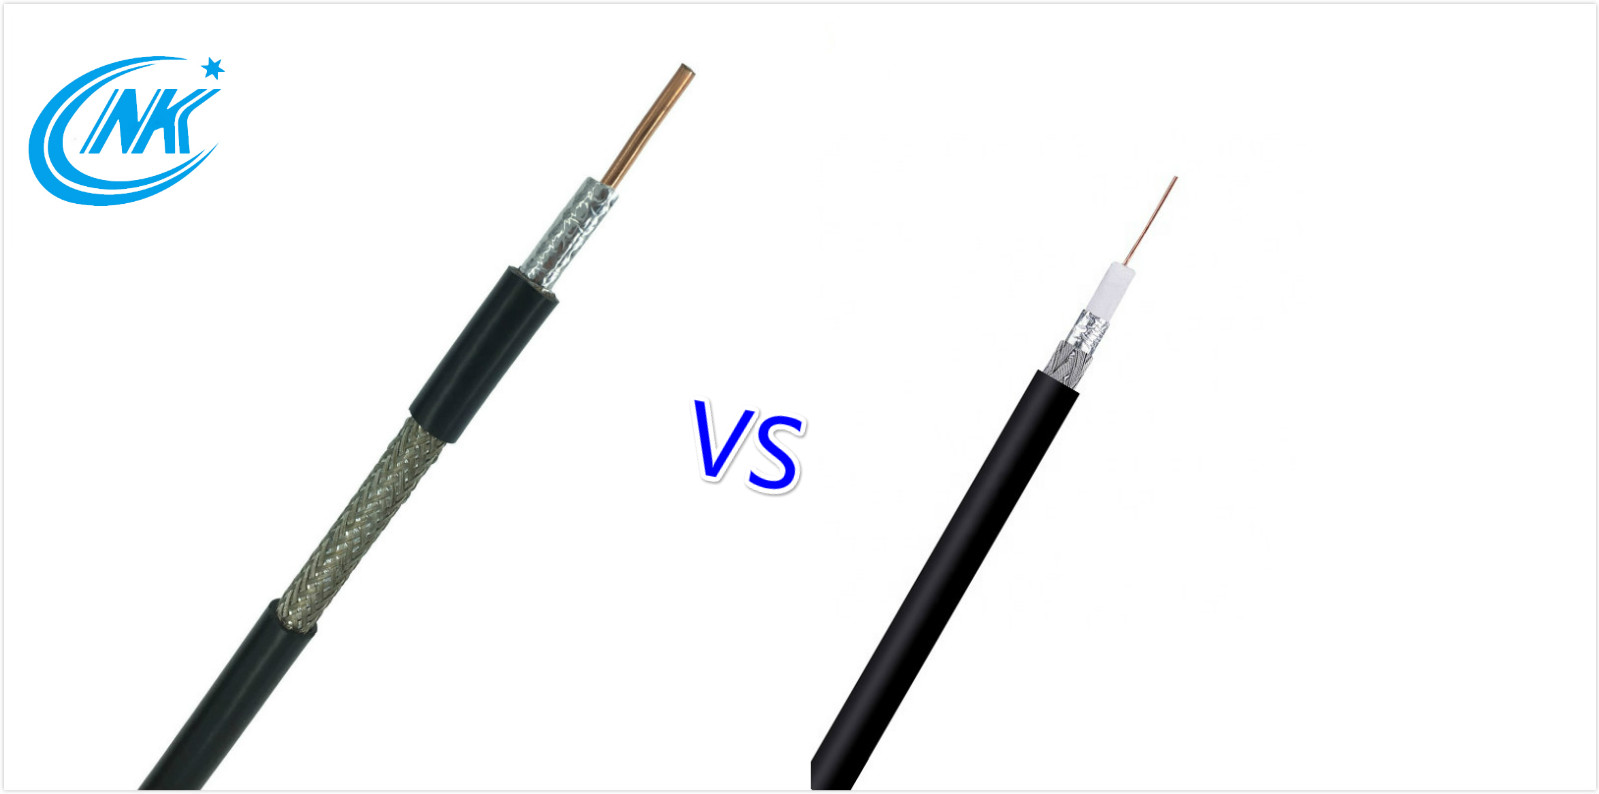 RG6 vs RG59: Which Should You Buy?